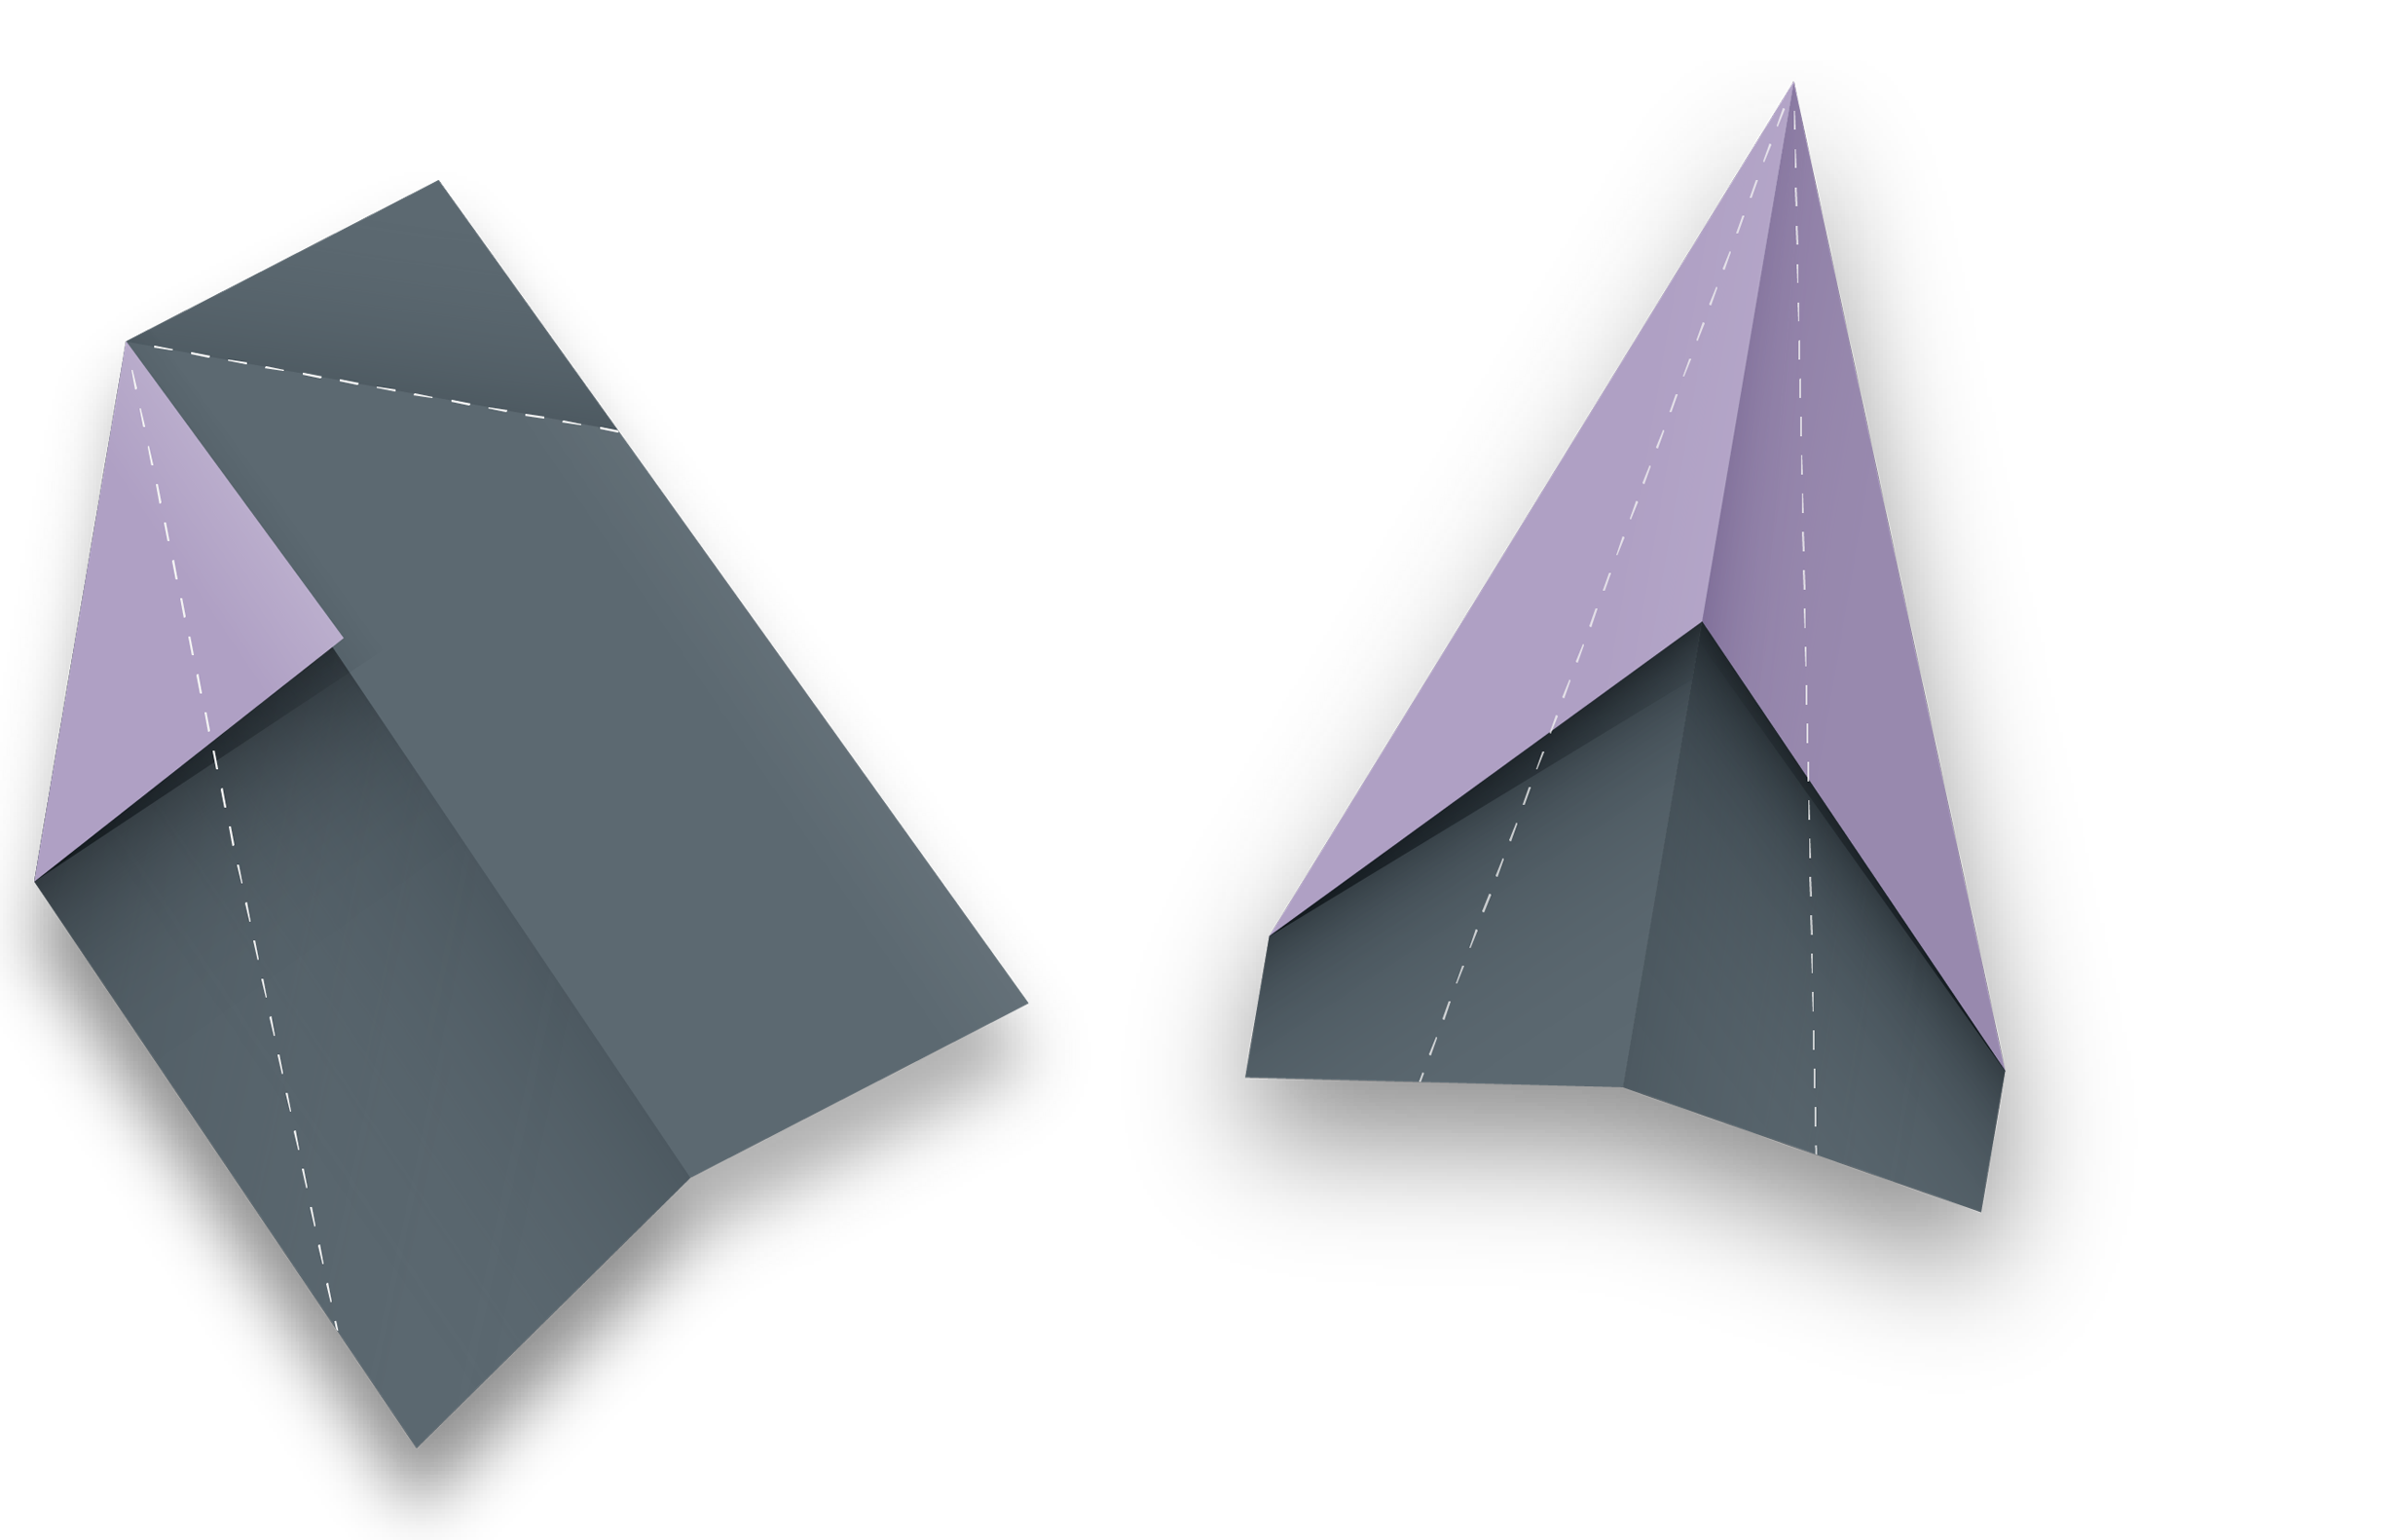 Content Creation Image of a paper airplane being folded